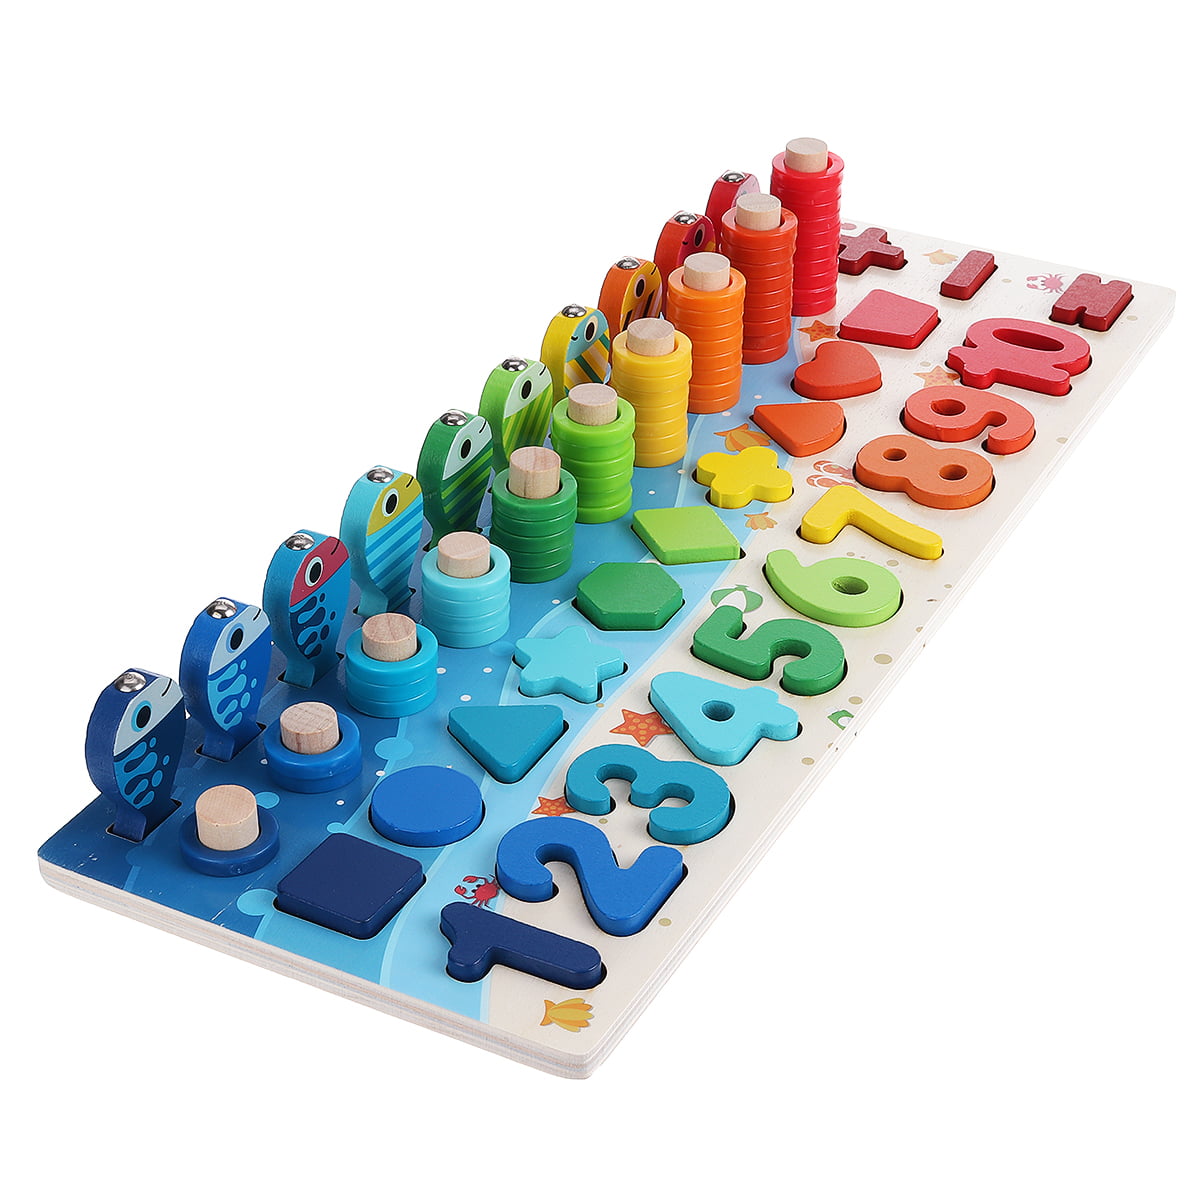 Wooden Number Shape Matching Board Digital Matching Logarithmic Board Colorful Shape Sorter Puzzle Toys Block Stacking Learning Toy Kids Toy Number and Block Holiday Gift